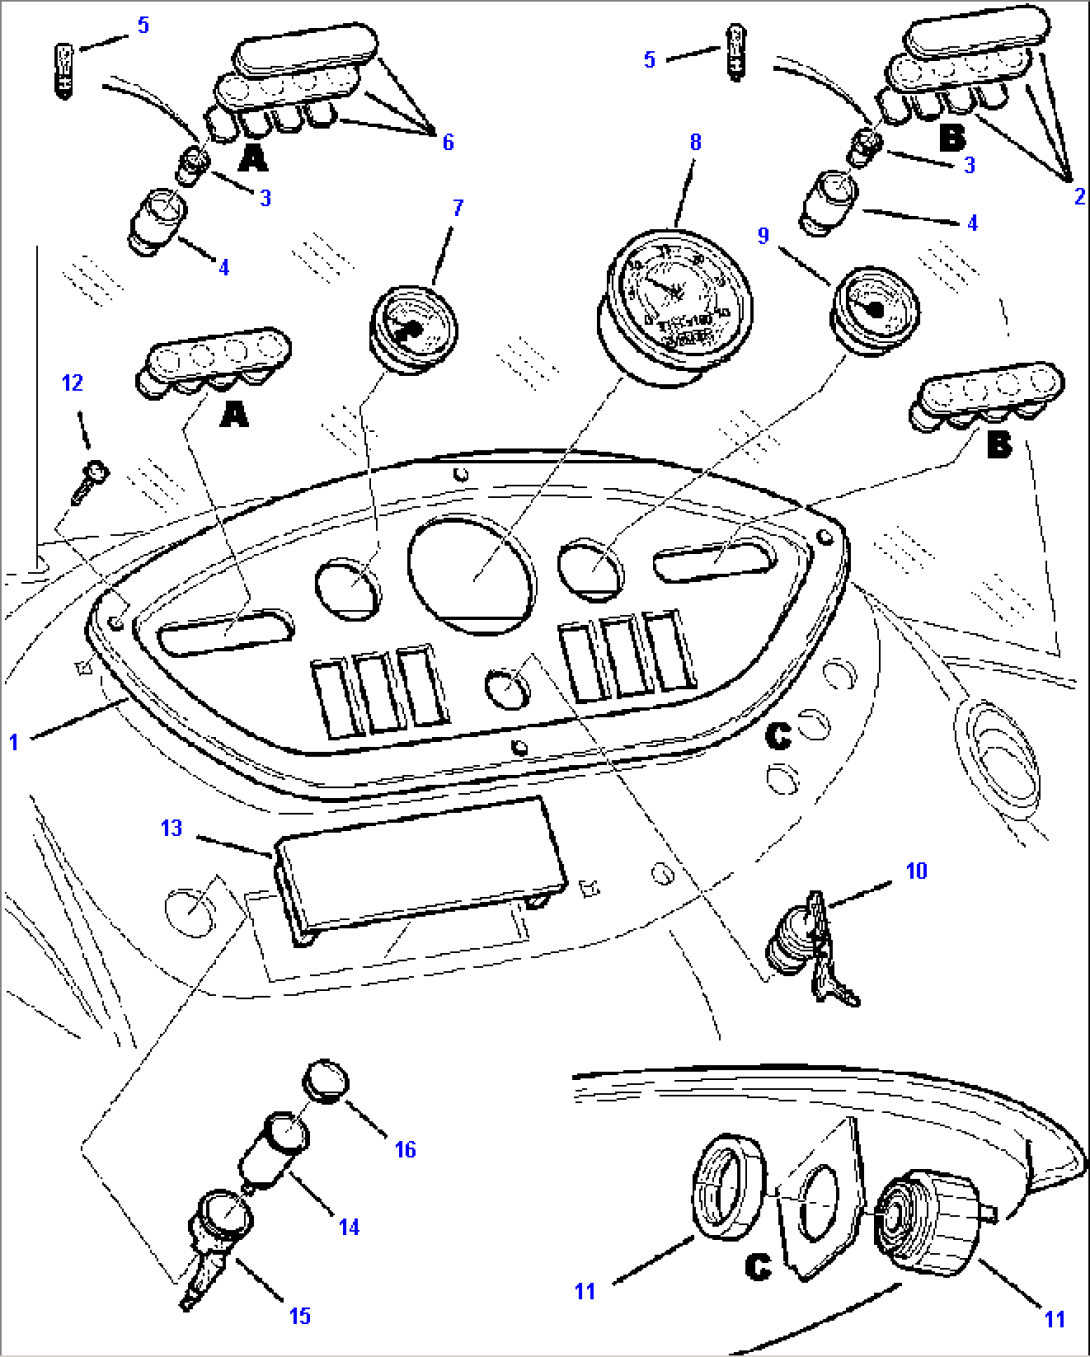 FIG. E1401-01A6 SIDE DASHBOARD - INSTRUMENT AND LIGHTS